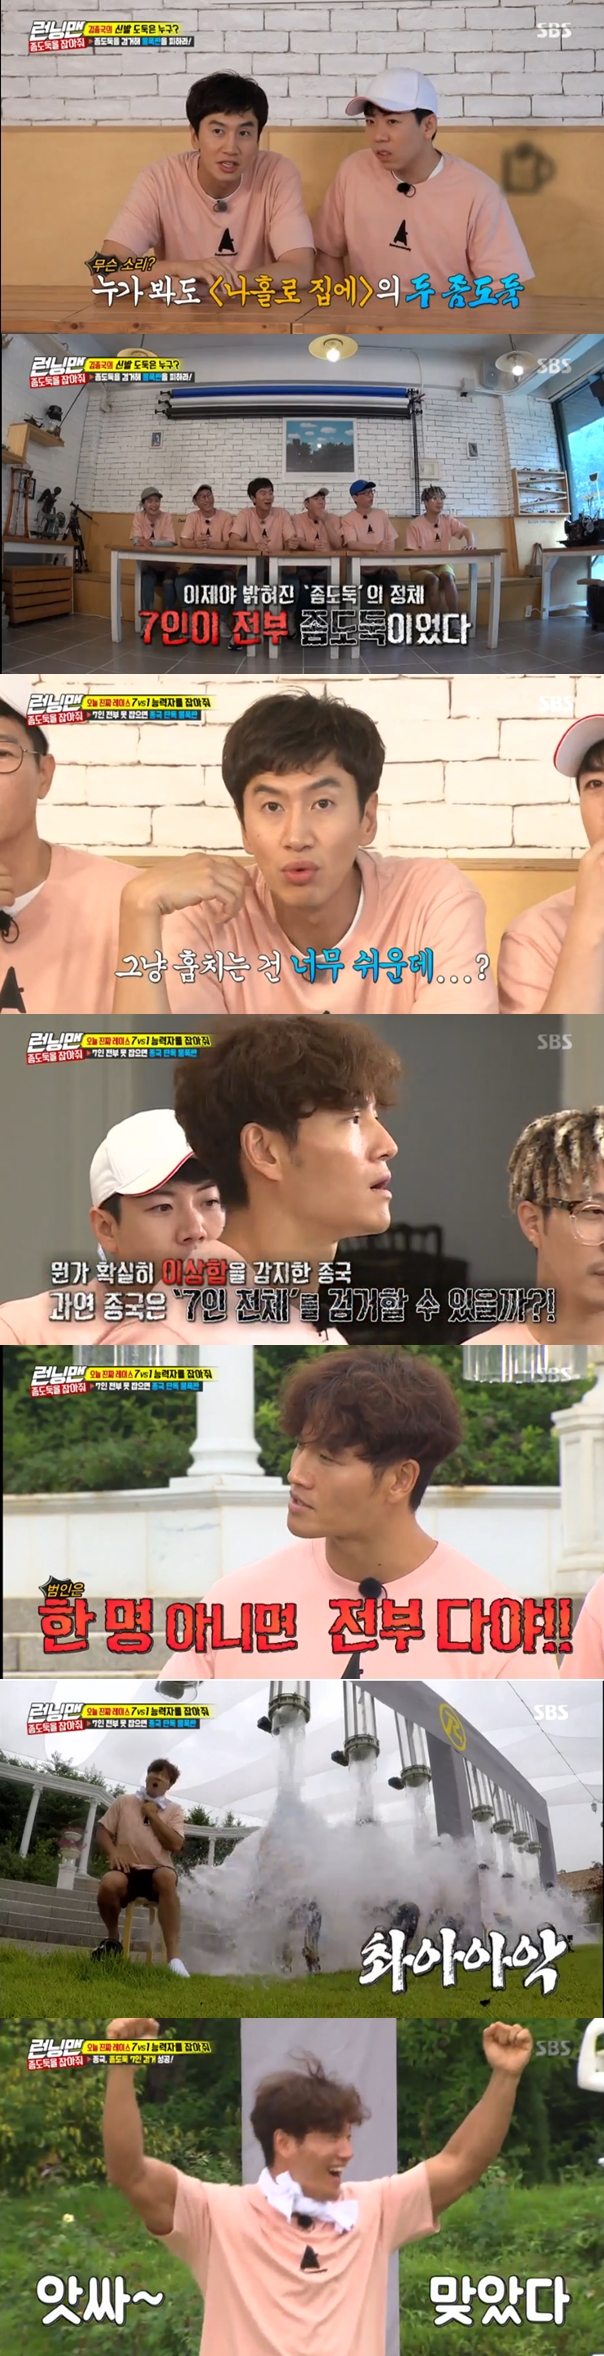 The talented Kim Jong-kook announced his health today.On the afternoon of the 29th, SBS Sunday entertainment program Running Man, The Little Thief was held to find the criminal who took Kim Jong-kooks shoes.From the morning, the crew prepared dinner for the members. The members wondered after the meal.At that time, Kim Jong-kook said that his shoes were gone, and the members drove Ji Seok-jin, who had been out awkwardly with a rice bowl, as a criminal and laughed, saying, Lets shoot again tomorrow.Kim Jong-kook said, Is this already a mission? He said, It is all clear.Yang said, There are brothers, but it is too much to be clear all the time.Kim Jong-kook suspected that Jeon So-min, who gave me flowers earlier, is strange, but Jeon So-min said, I did not want to sit next to my brother.In particular, he threatened Yoo Jae-Suk, who pointed out rough behavior, saying, Please make it tough?The members obtained hints through Game; the hints the members gained from the game that matched the quiz had a womans hand.Kim Jong-kook questioned her, saying, This looks like you, comparing the hands of Jeon So-min.However, Lee Kwang-soo, who was watching the hint picture together, was embarrassed and called Jeon So-min.We have all our signatures here, he said, raising his curiosity with a worried expression.The Little Thief by Kim Jong-kook Shoes was not one.Before the opening, the crew called seven members except Kim Jong-kook and said, Todays Race is a race to catch 7vs1.When I heard the game rule, Lee Kwang-soo gave me an angry smile, saying, We are too ignoring.However, the members soon burned their will, saying, Lets catch Kim Jong-kook even at this opportunity.Kim Jong-kook, who saw a photo of Jeon So-min hand, suspected only of Jeon So-min.The members also sympathized, making Kim Jong-kook continue to suspect Jeon So-min, but the power was also the power.Kim Jong-kook then looked at the hint of the eye and began to concentrate on the object in his eyes.He then said, I do not think it is one.Kim Jong-kooks Murder, She Wrote power on the ballot was even brighter.Kim Jong-kook said, Why do not you do Murder, She Wrote today?He then counted the number of members and said, I think the perpetrator is all but me.It doesnt matter to us that you lost your shoes, just go to vote, Yoo Jae-Suk said, bewildered, adding: Ive got a touch.I will believe in that point and go to the polls. After Kim Jong-kook entered the polls, the members prepared to be hit by a water bomb; naturally, the members took off their socks and took off their shoes and headed for the penalty chair.Lee Kwang-soo laughed, saying, I have to carry another panty.Kim Jong-kook proved himself a powerhouse, winning the 7vs1 showdown; the members were hit by a water bomb, and one by one analyzed the cause of the defeat.I was convinced that I would lose from the time I had already eaten, Yoo Jae-Suk resigned.Lee Kwang-soo laughed, saying, When I face my brother in the future, I have to put my brother in 8vs1.